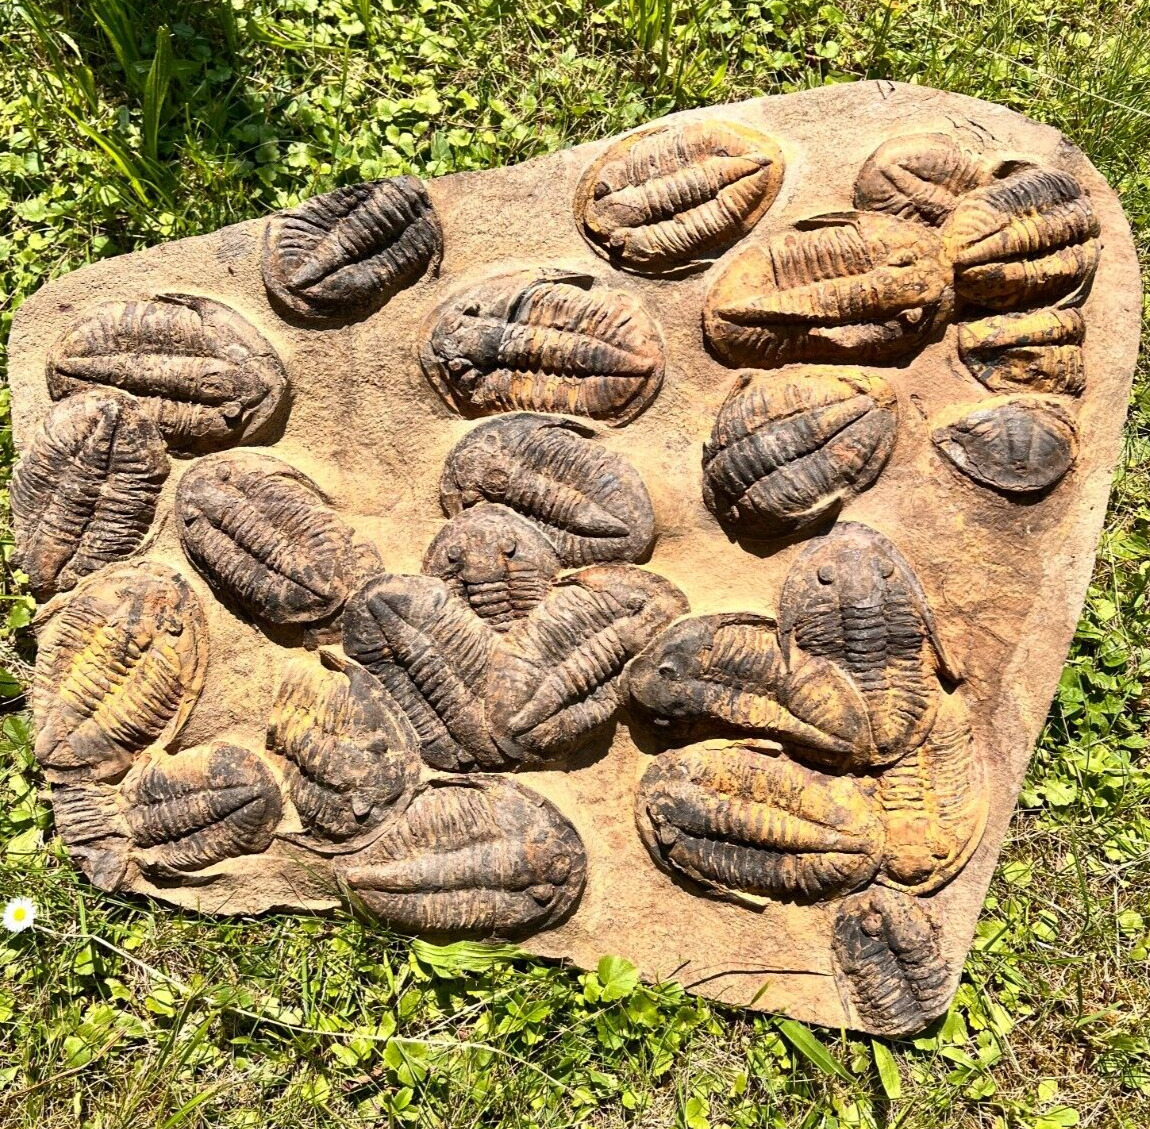 BIG Mortality Plate Of Large Asaphid Trilobites Fossils